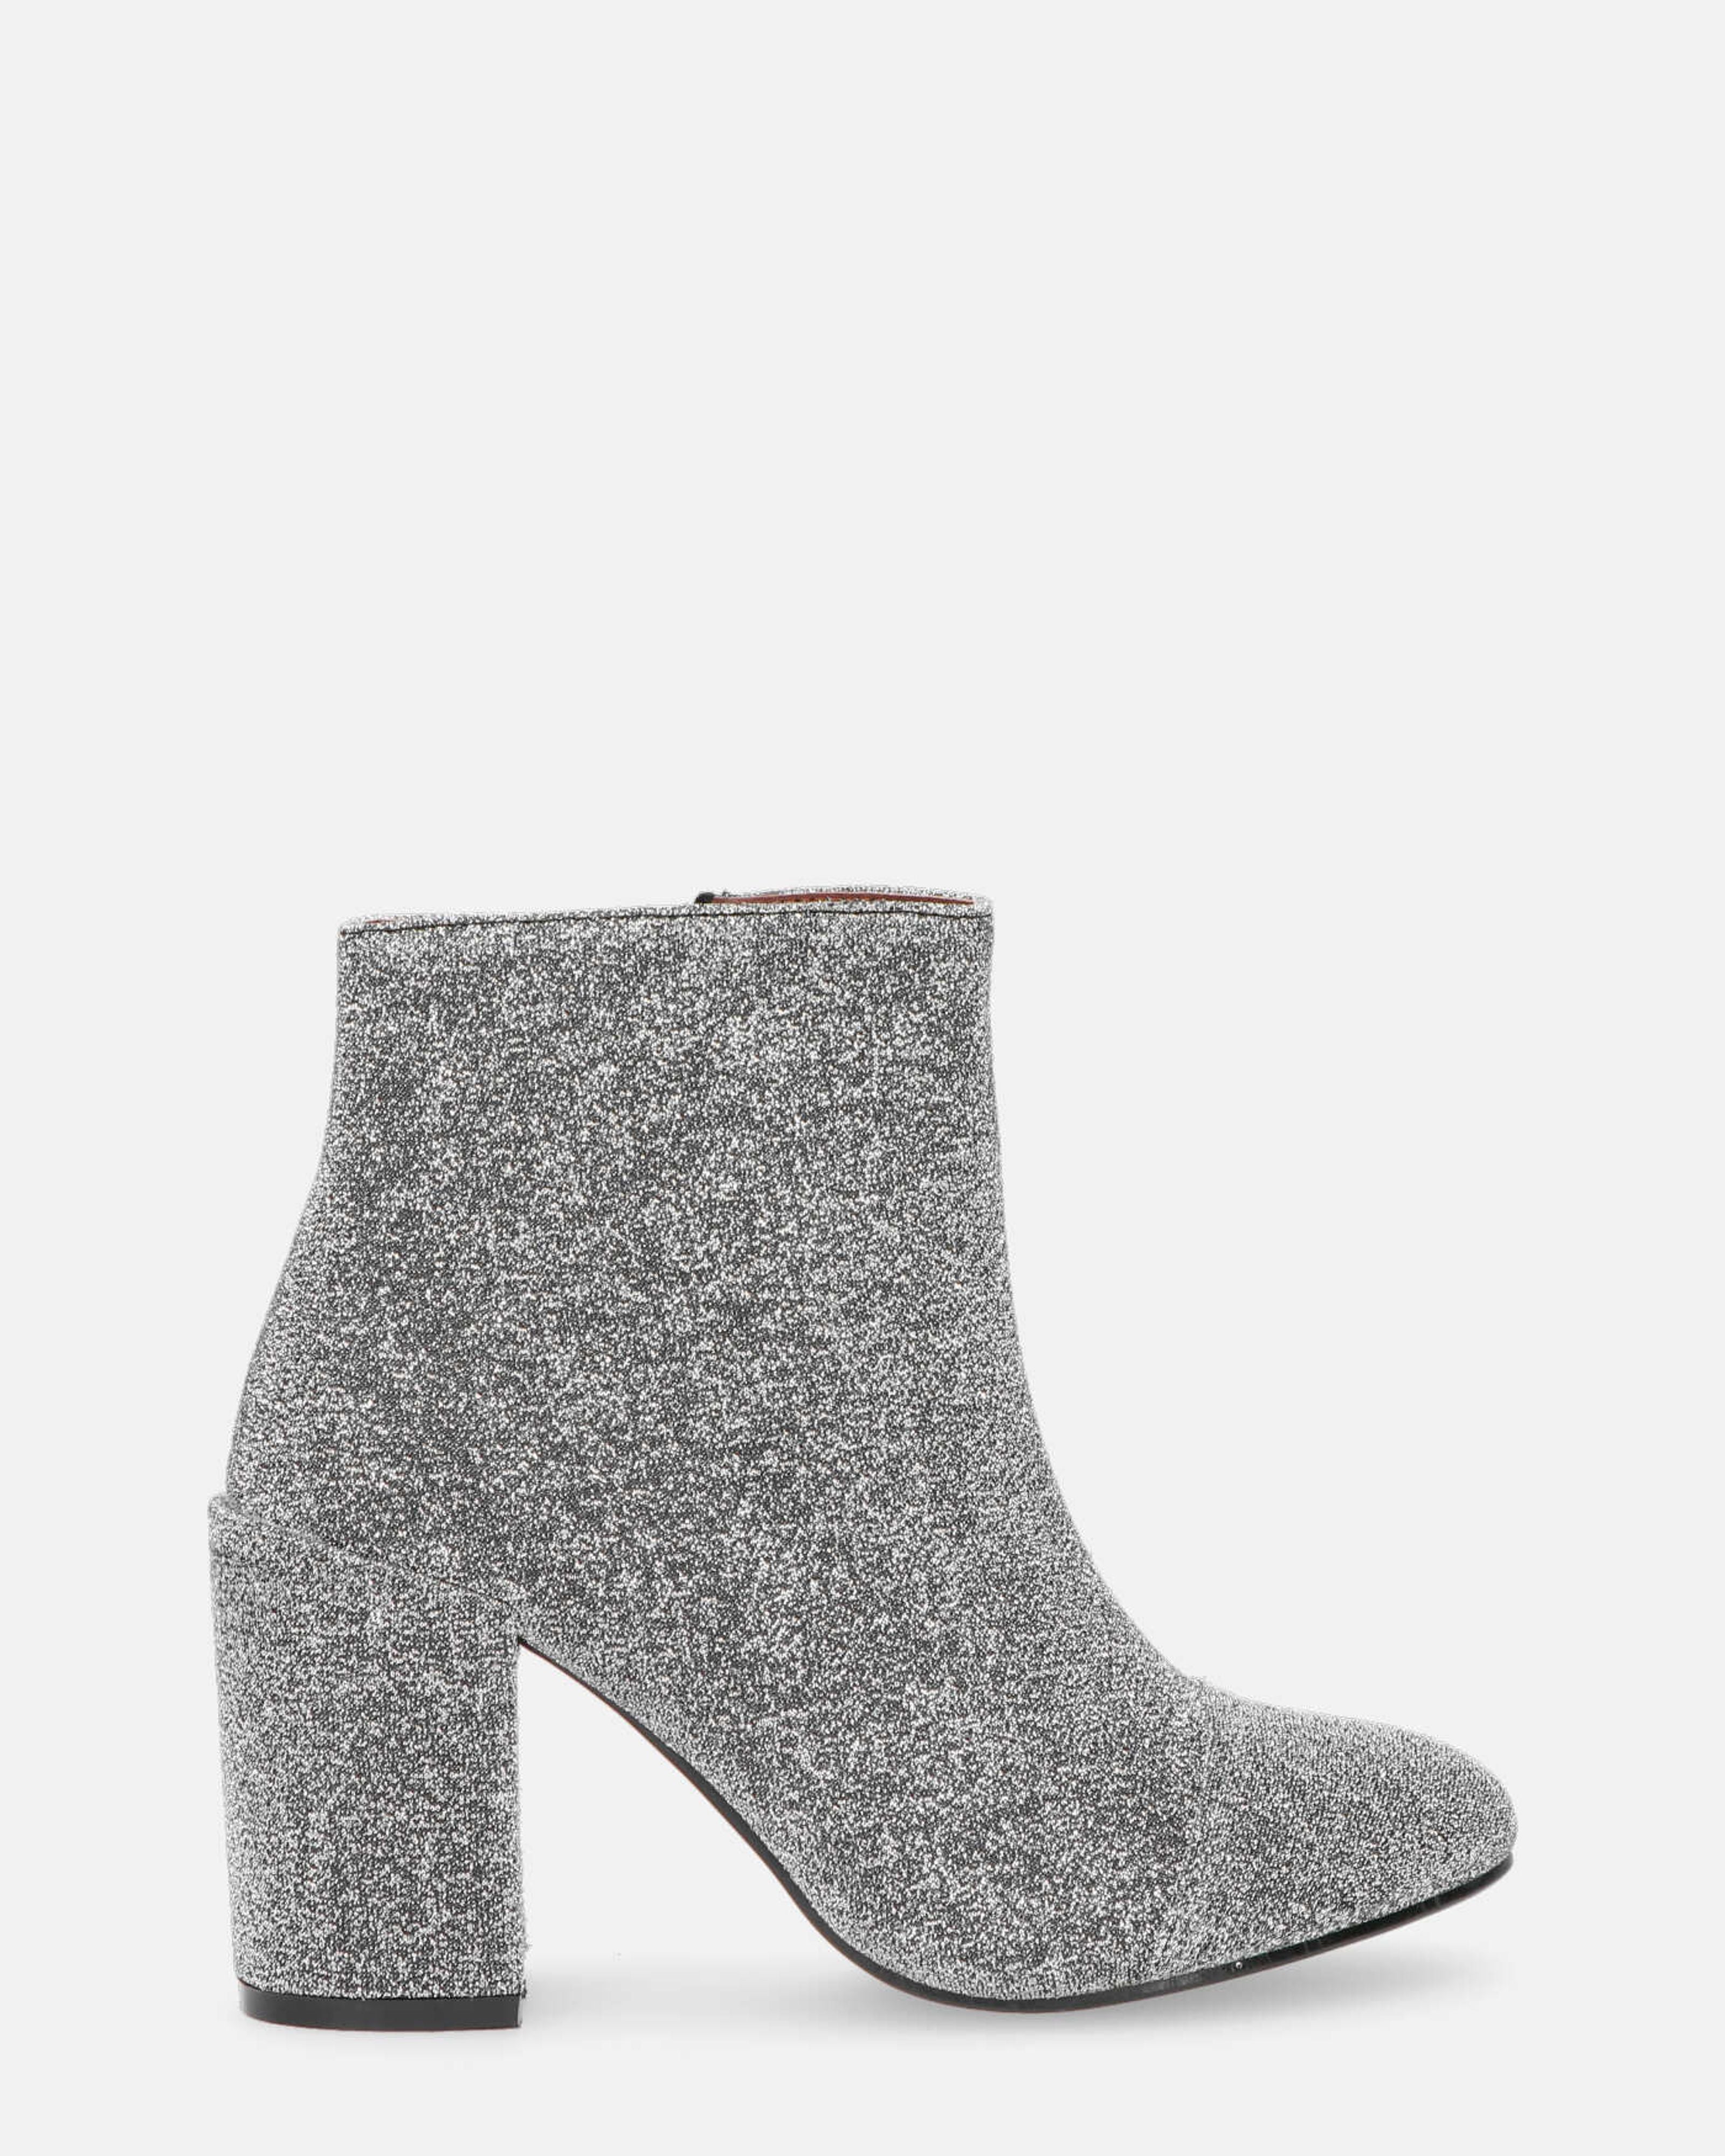 IRENE - ankle boots in grey glitter